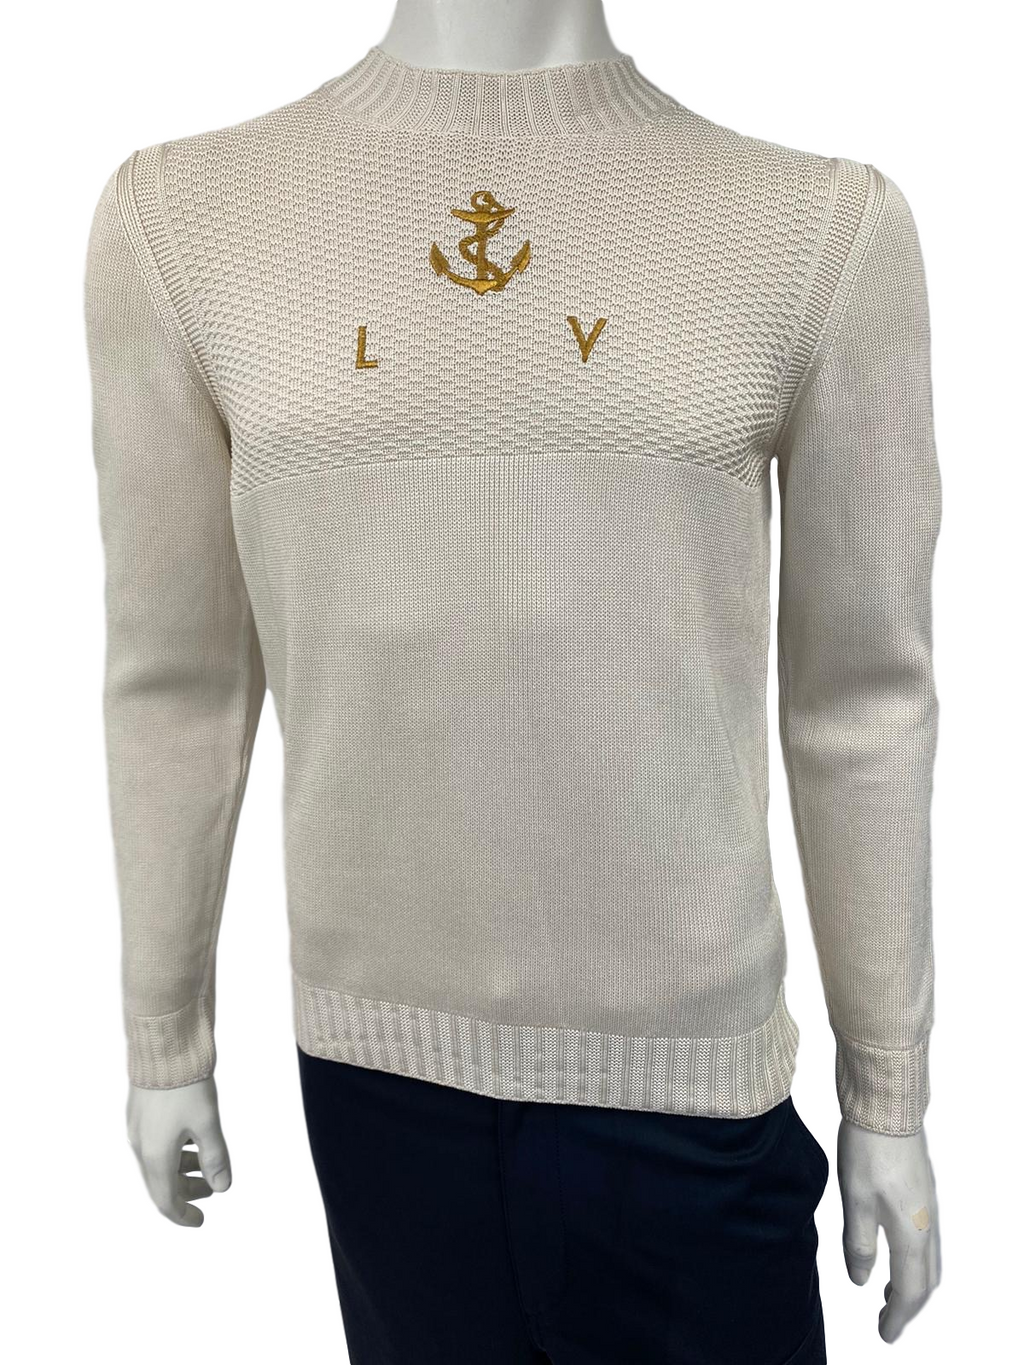 Louis Vuitton, Sweaters, Louis Vuitton Leather Patch Crew Neck Sweater